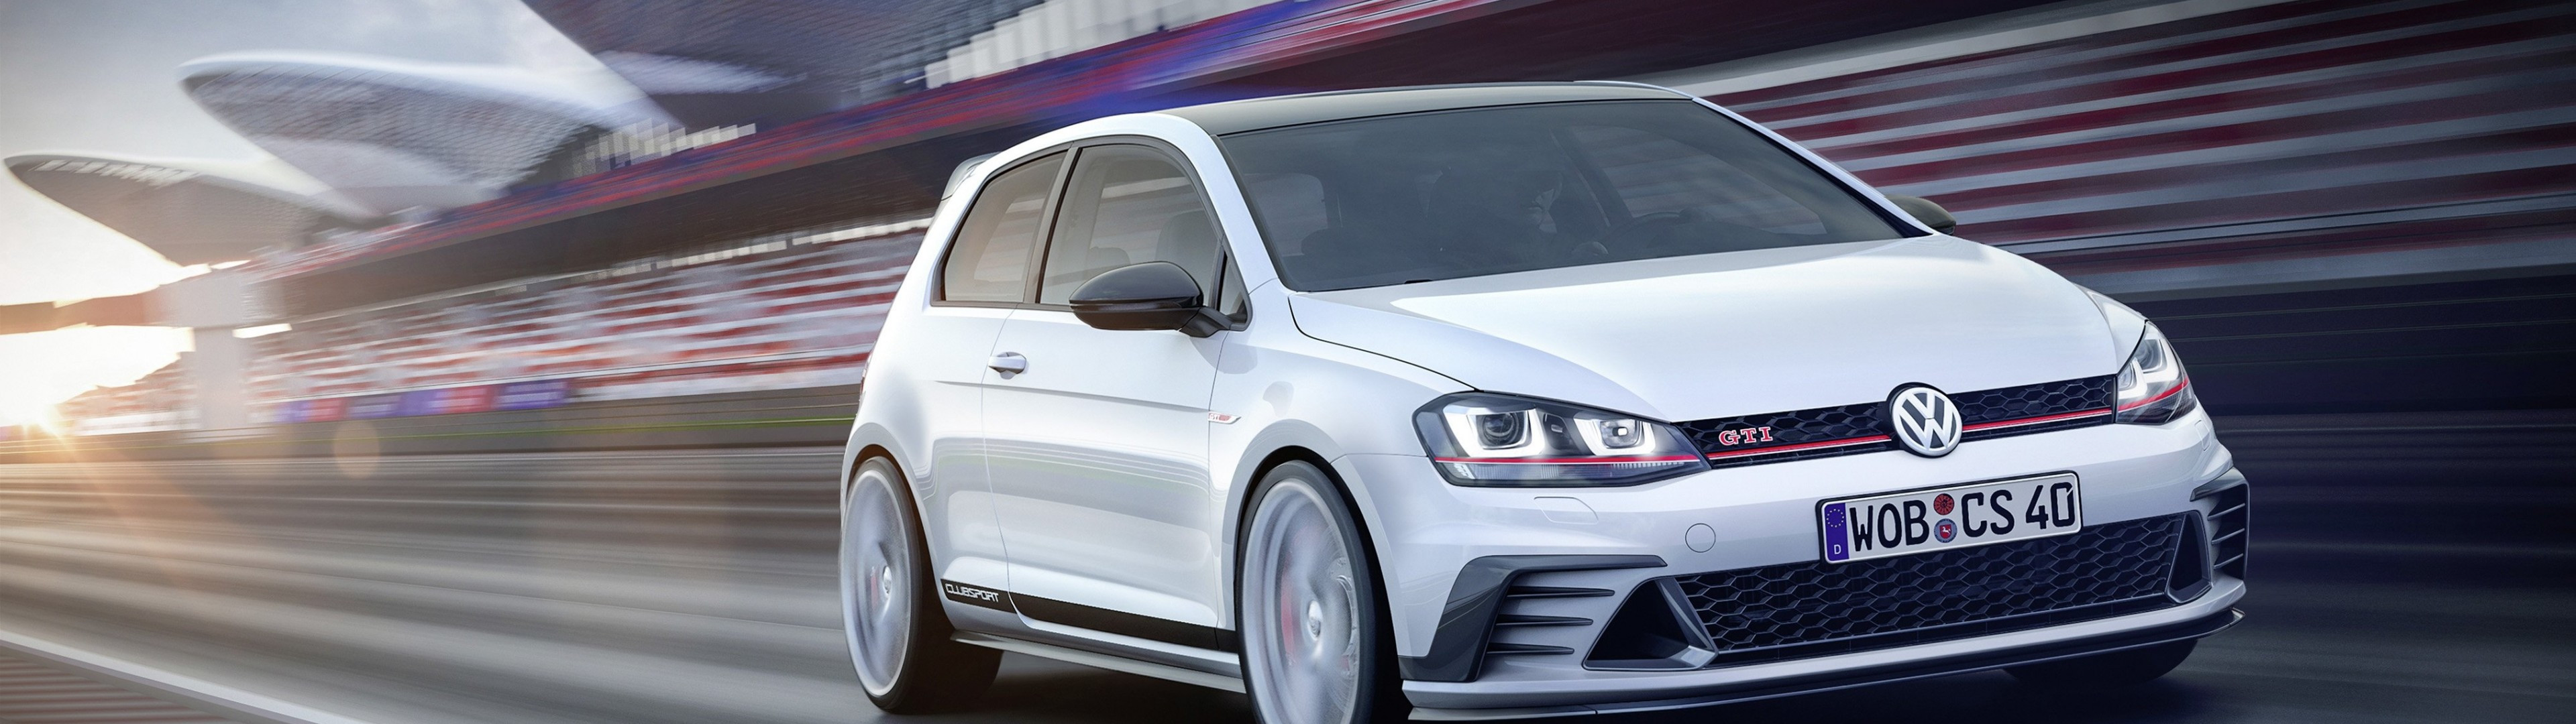 Download 3840x1080 Volkswagen Golf Gti White Road Cars Wallpapers 3840x1080